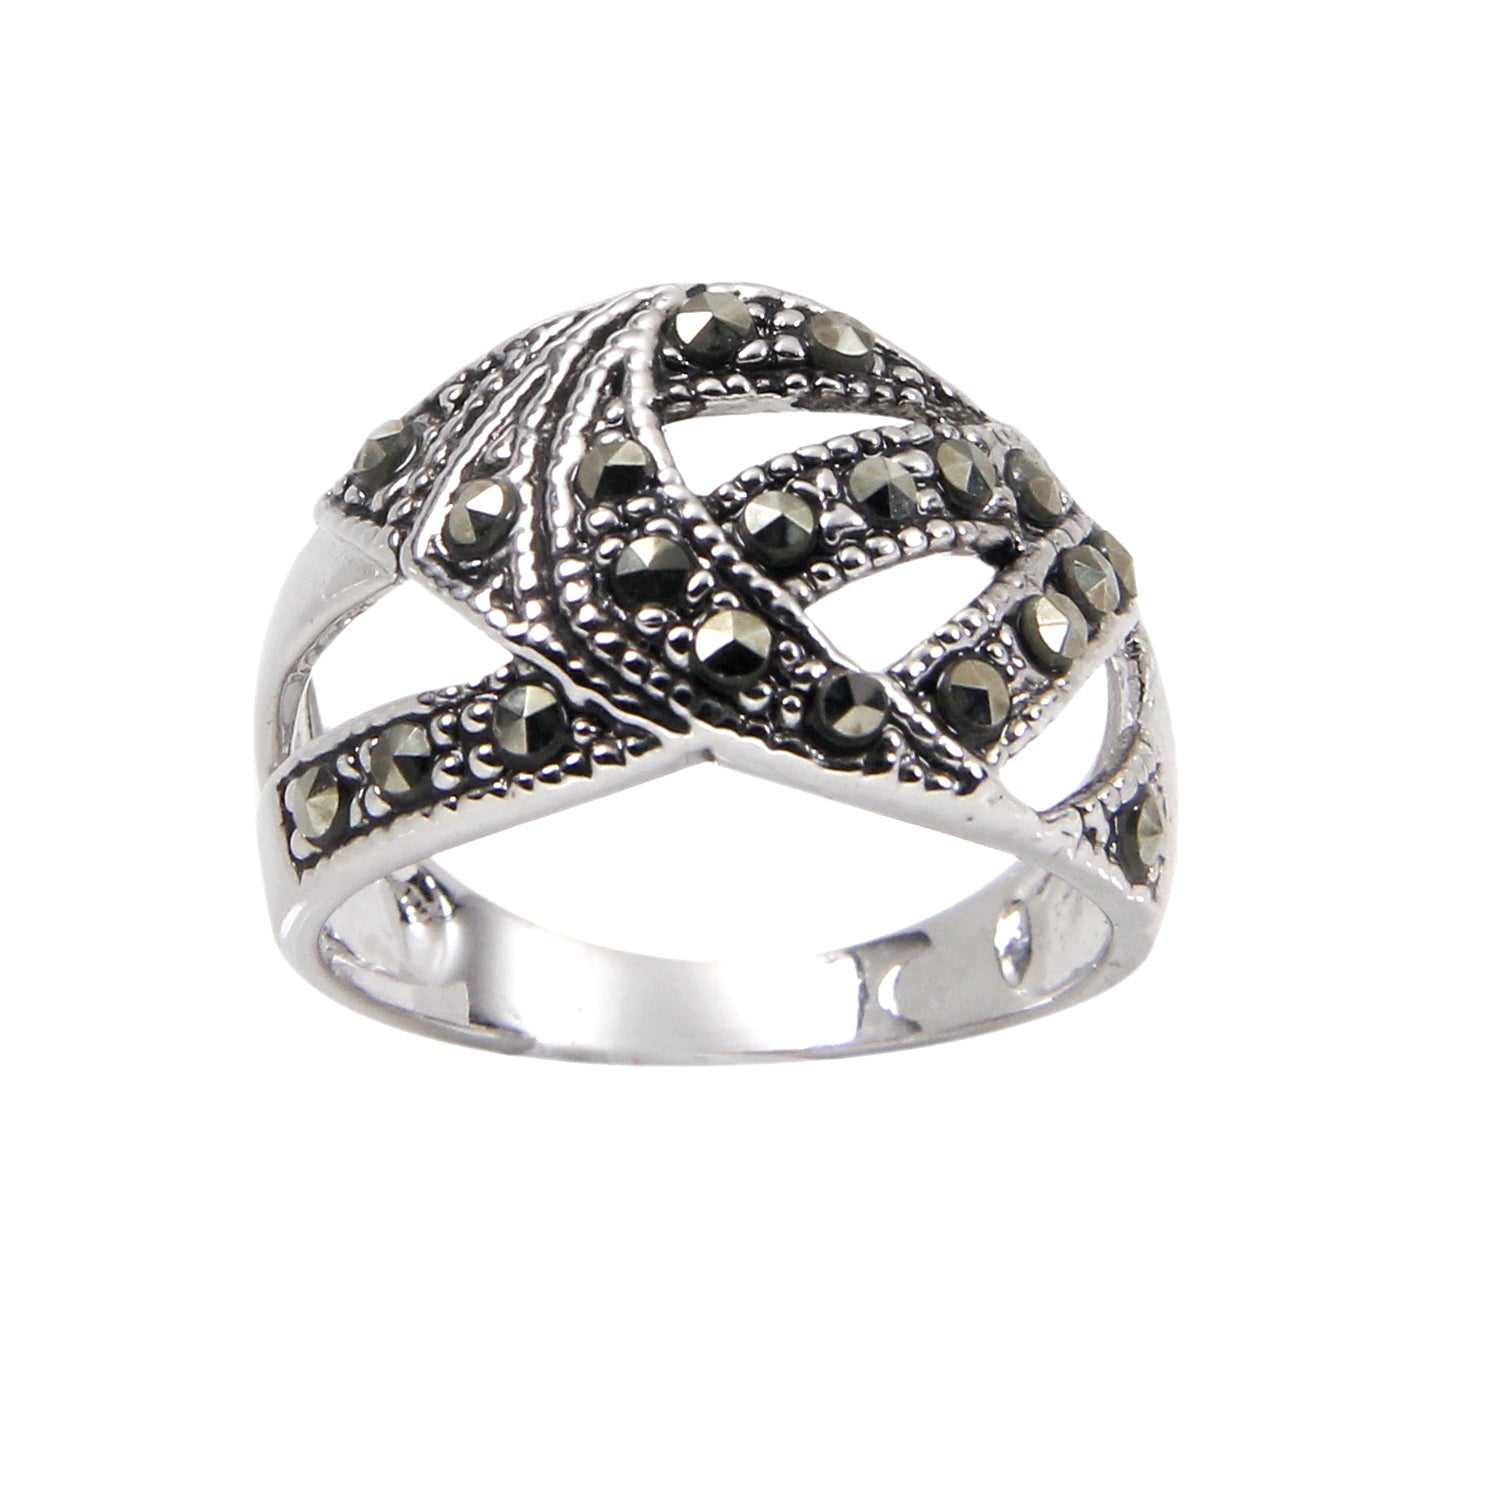 Chevron Band Sterling Silver Marcasite Ring